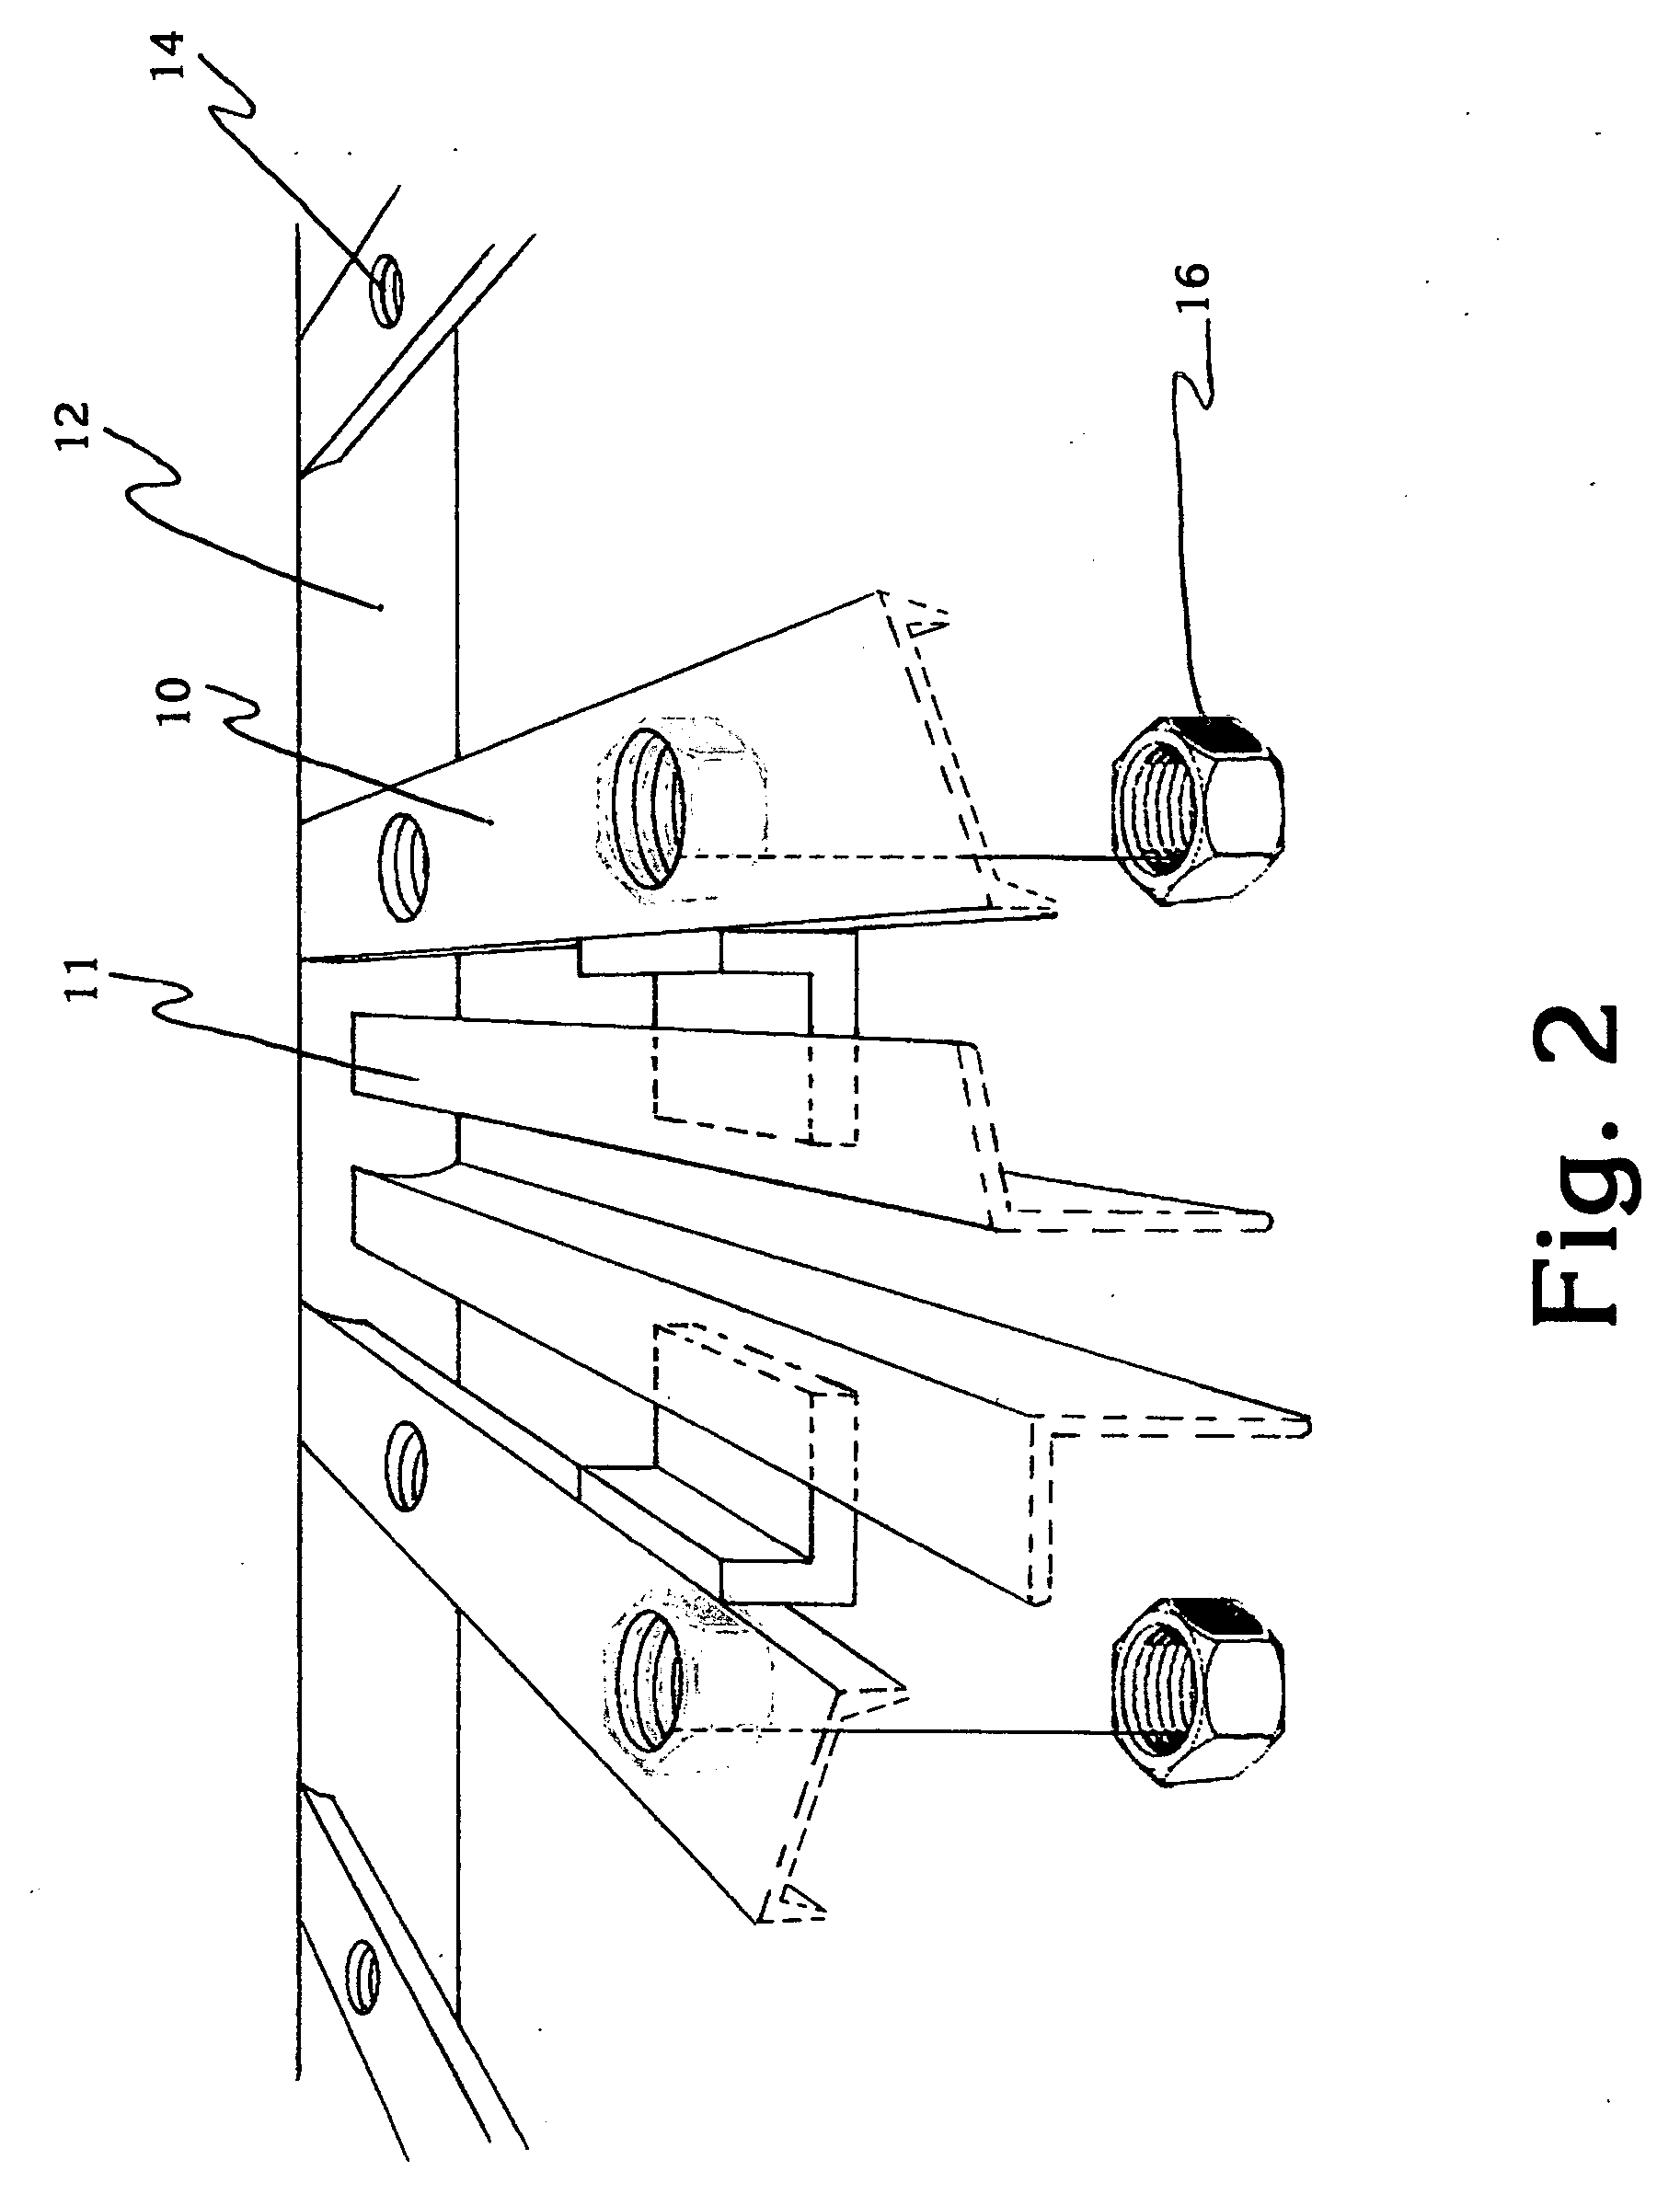 Vehicle carrier rack utilizing a grid system for mounting accessories and load blocks